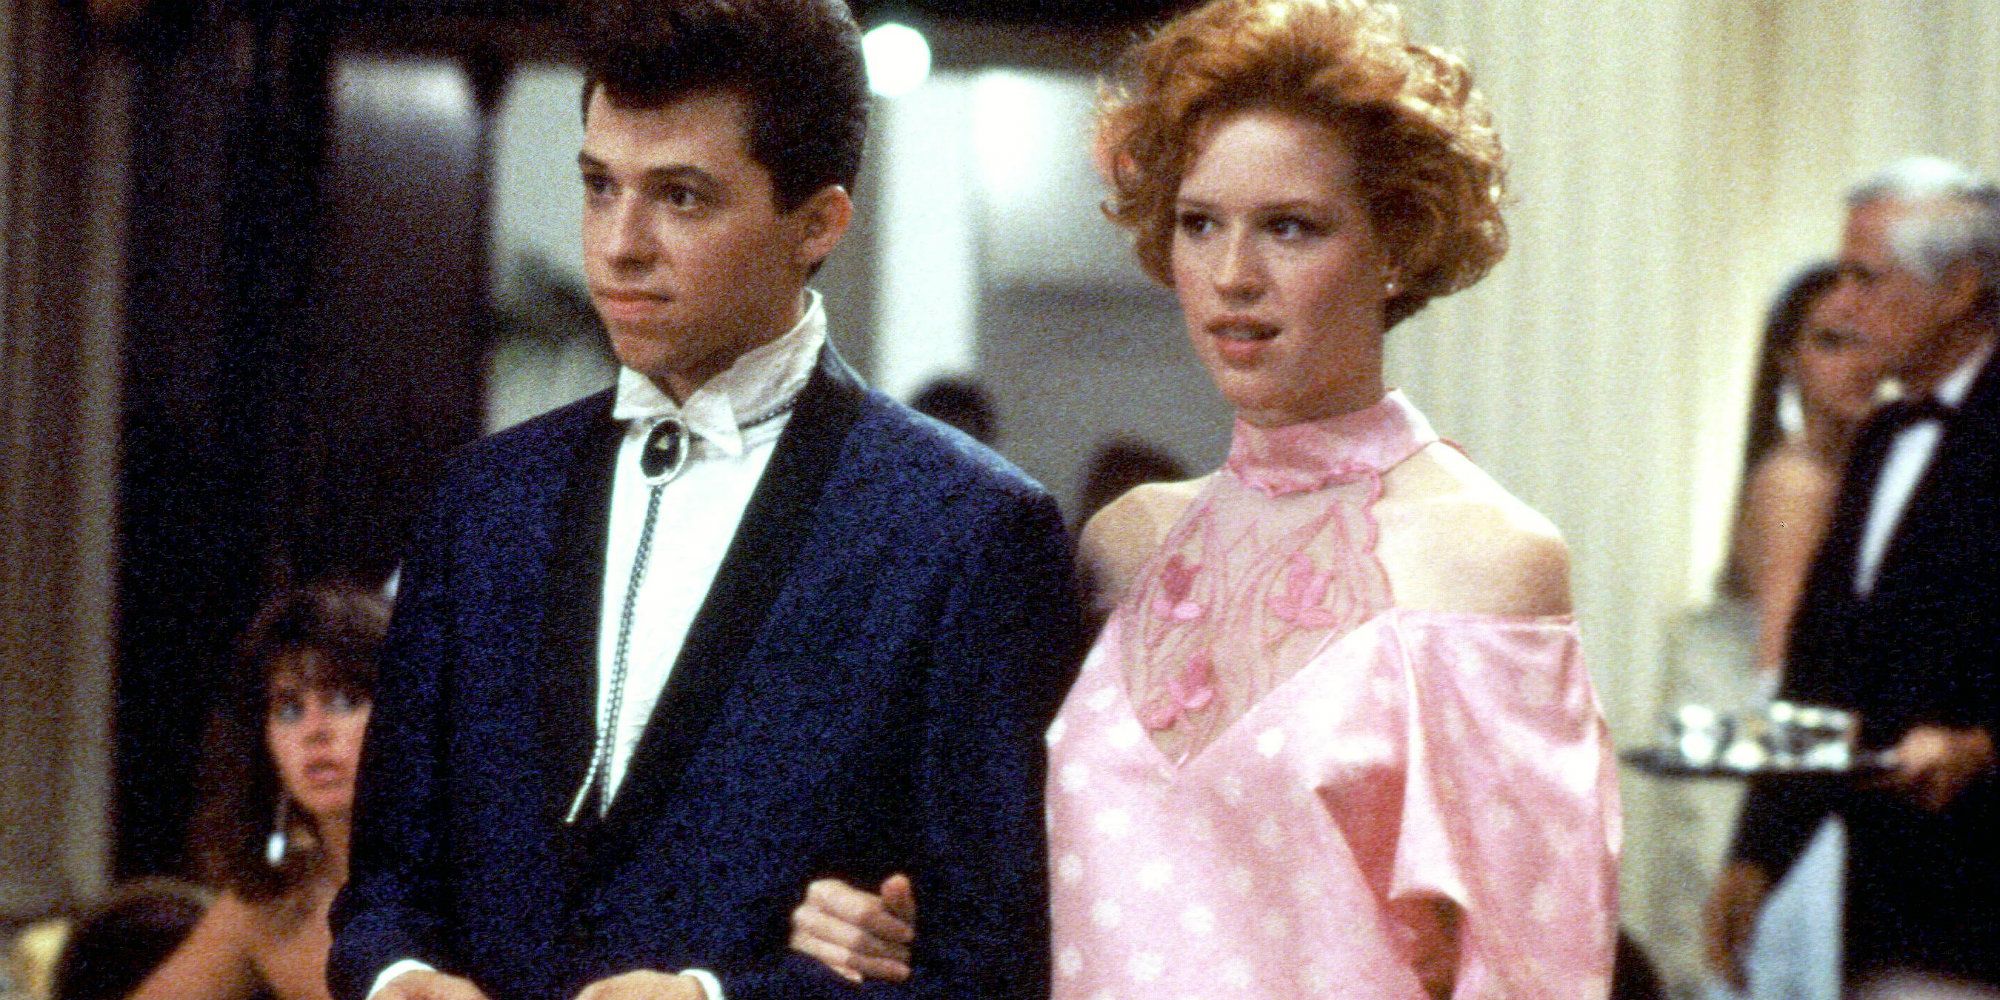 Jon Cryer and Mollie Ringwald in Pretty in Pink